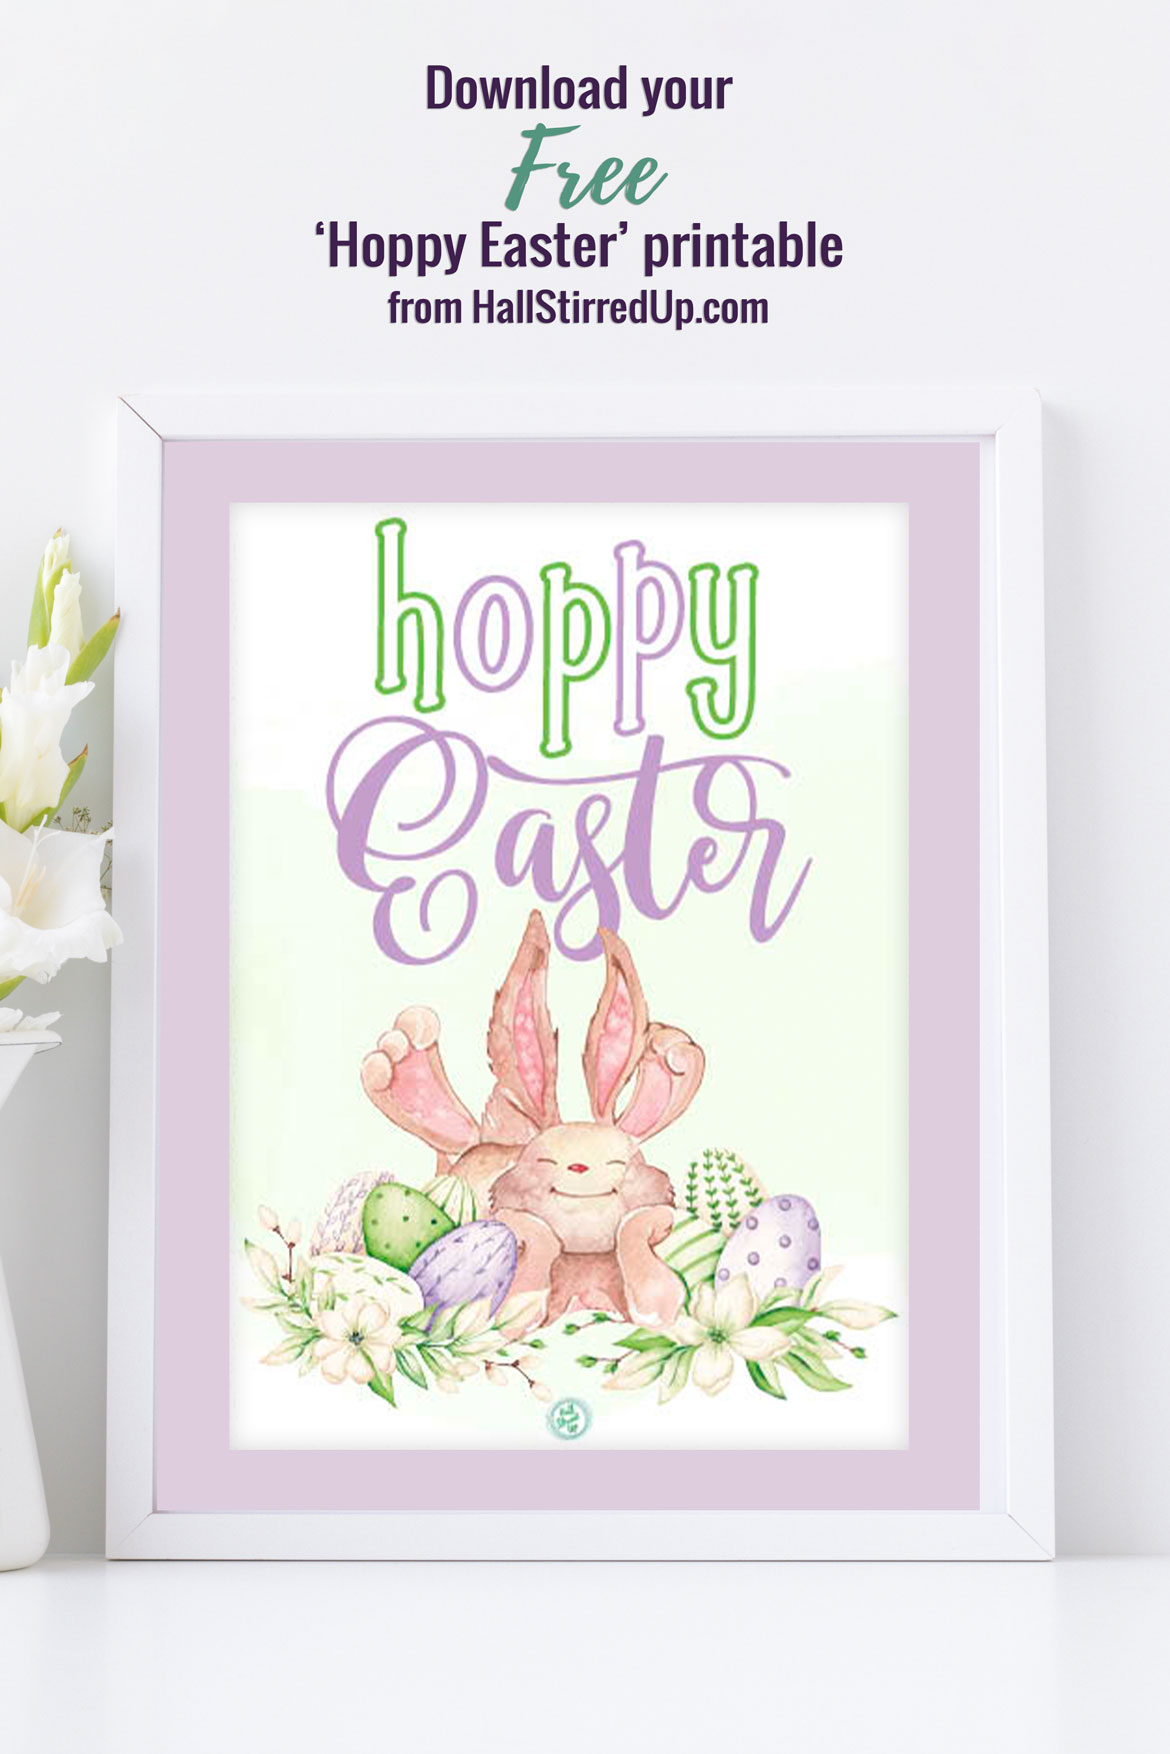 Have a Hoppy Easter with a fun free printable